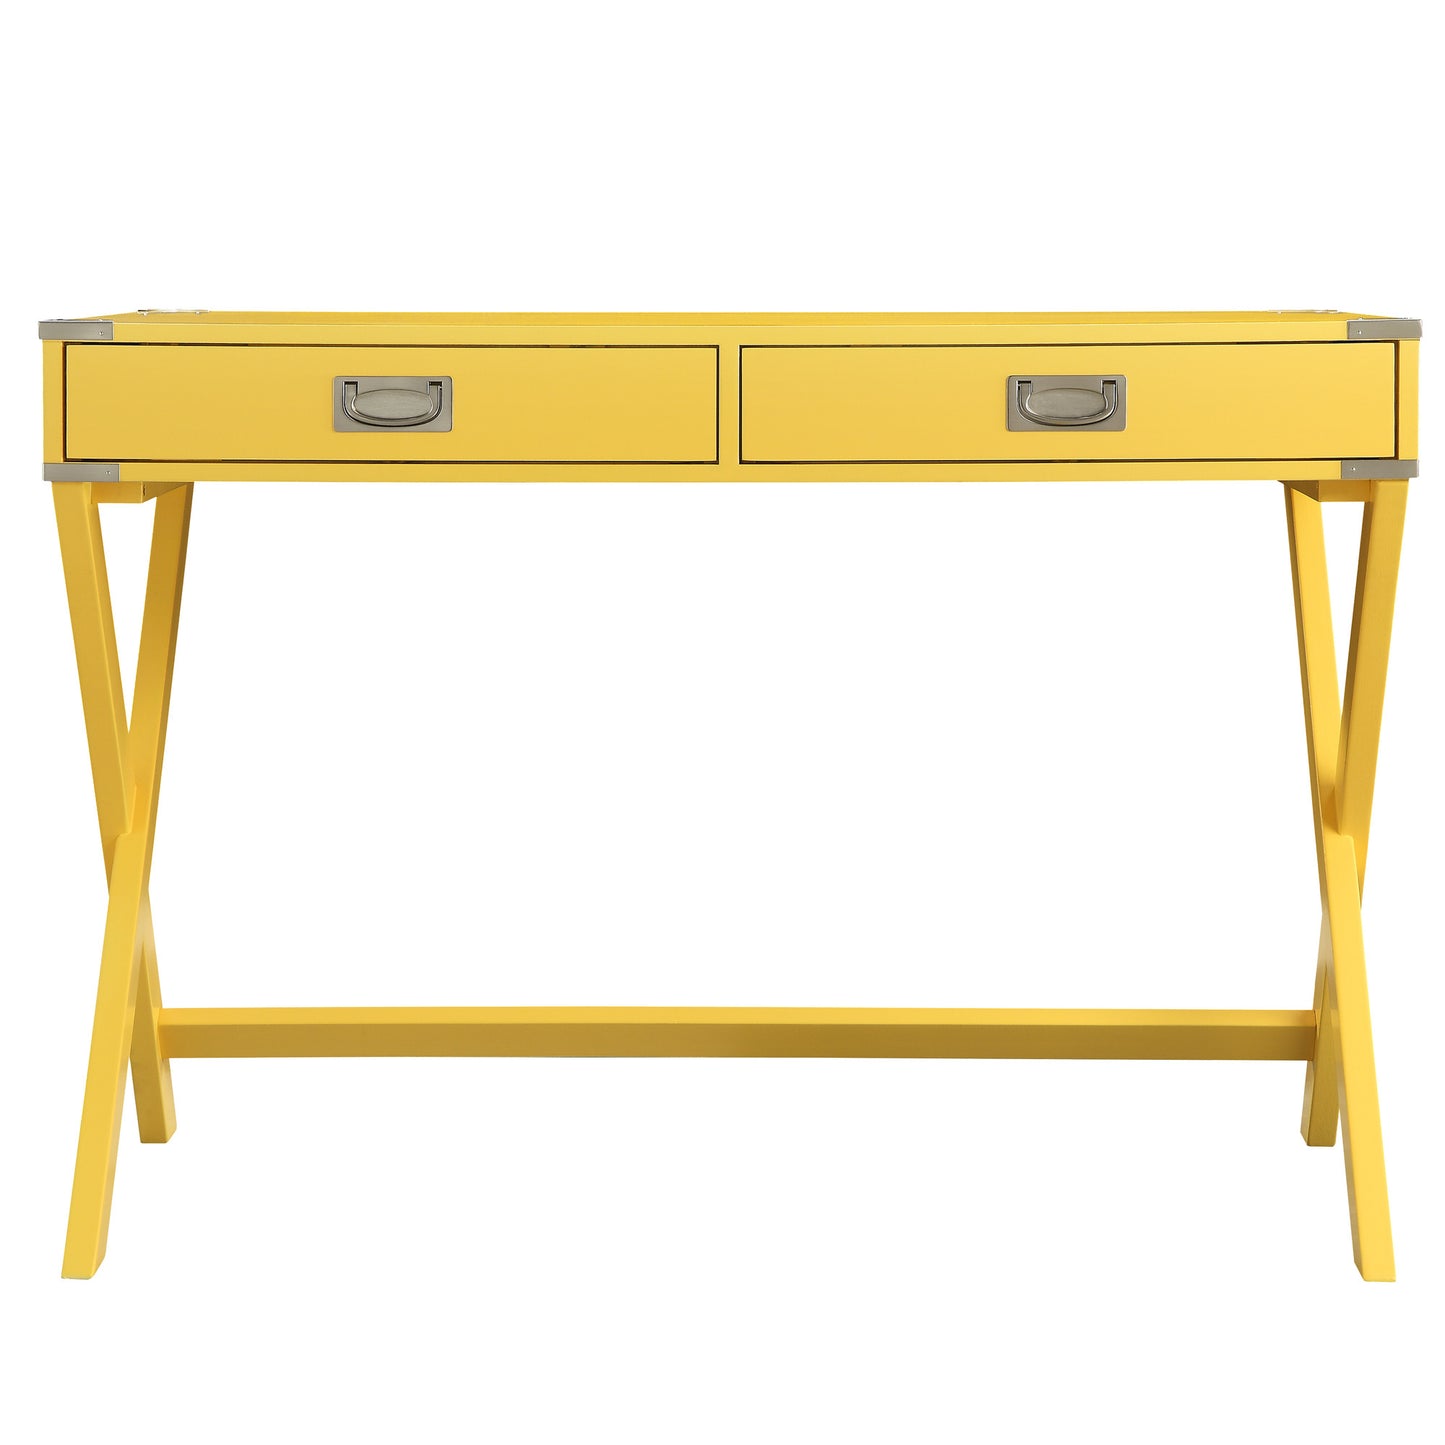 X-Base Wood Accent Campaign Writing Desk - Yellow